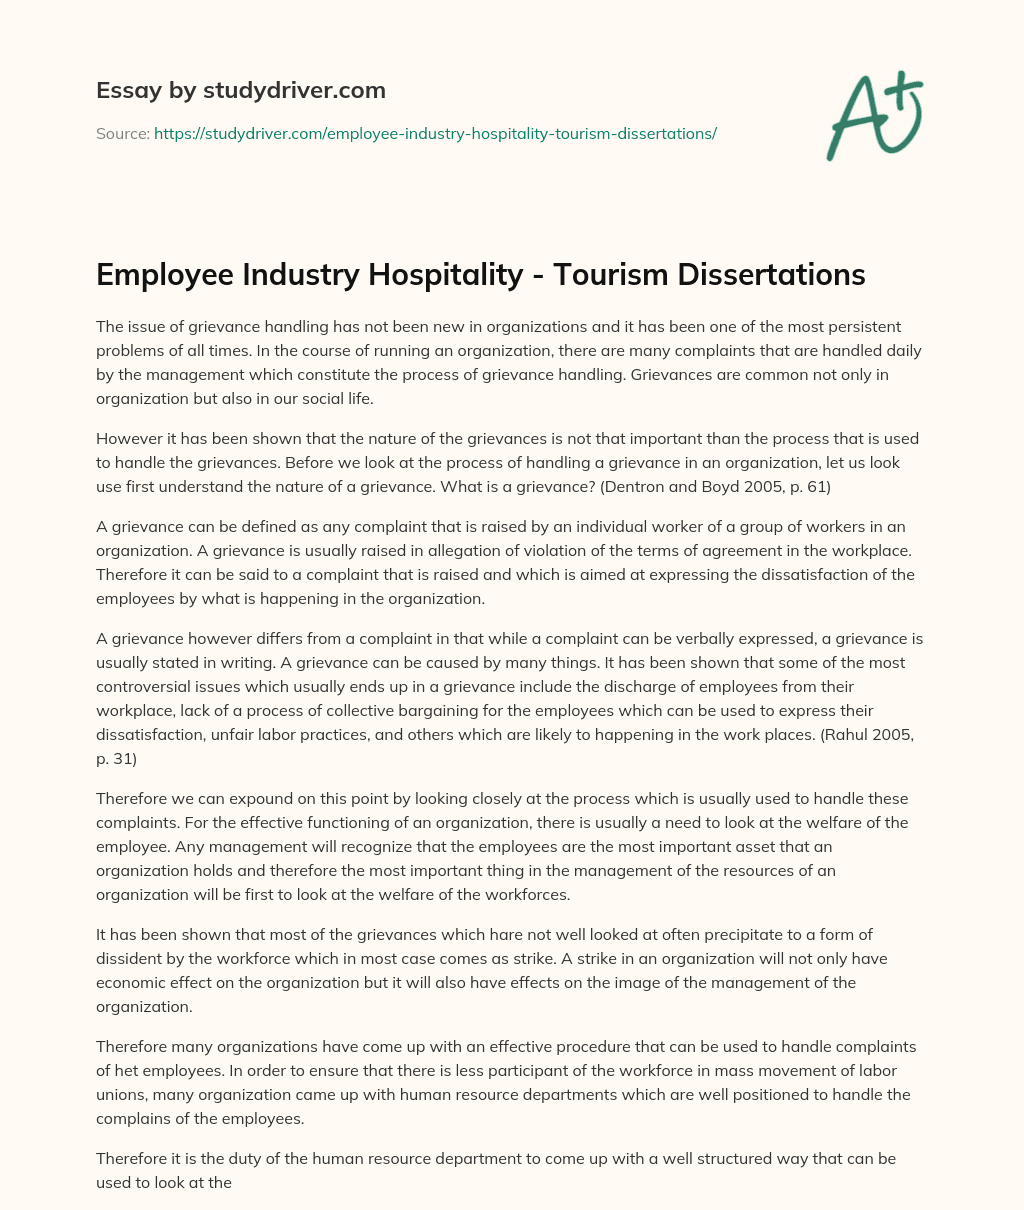 Employee Industry Hospitality – Tourism Dissertations essay